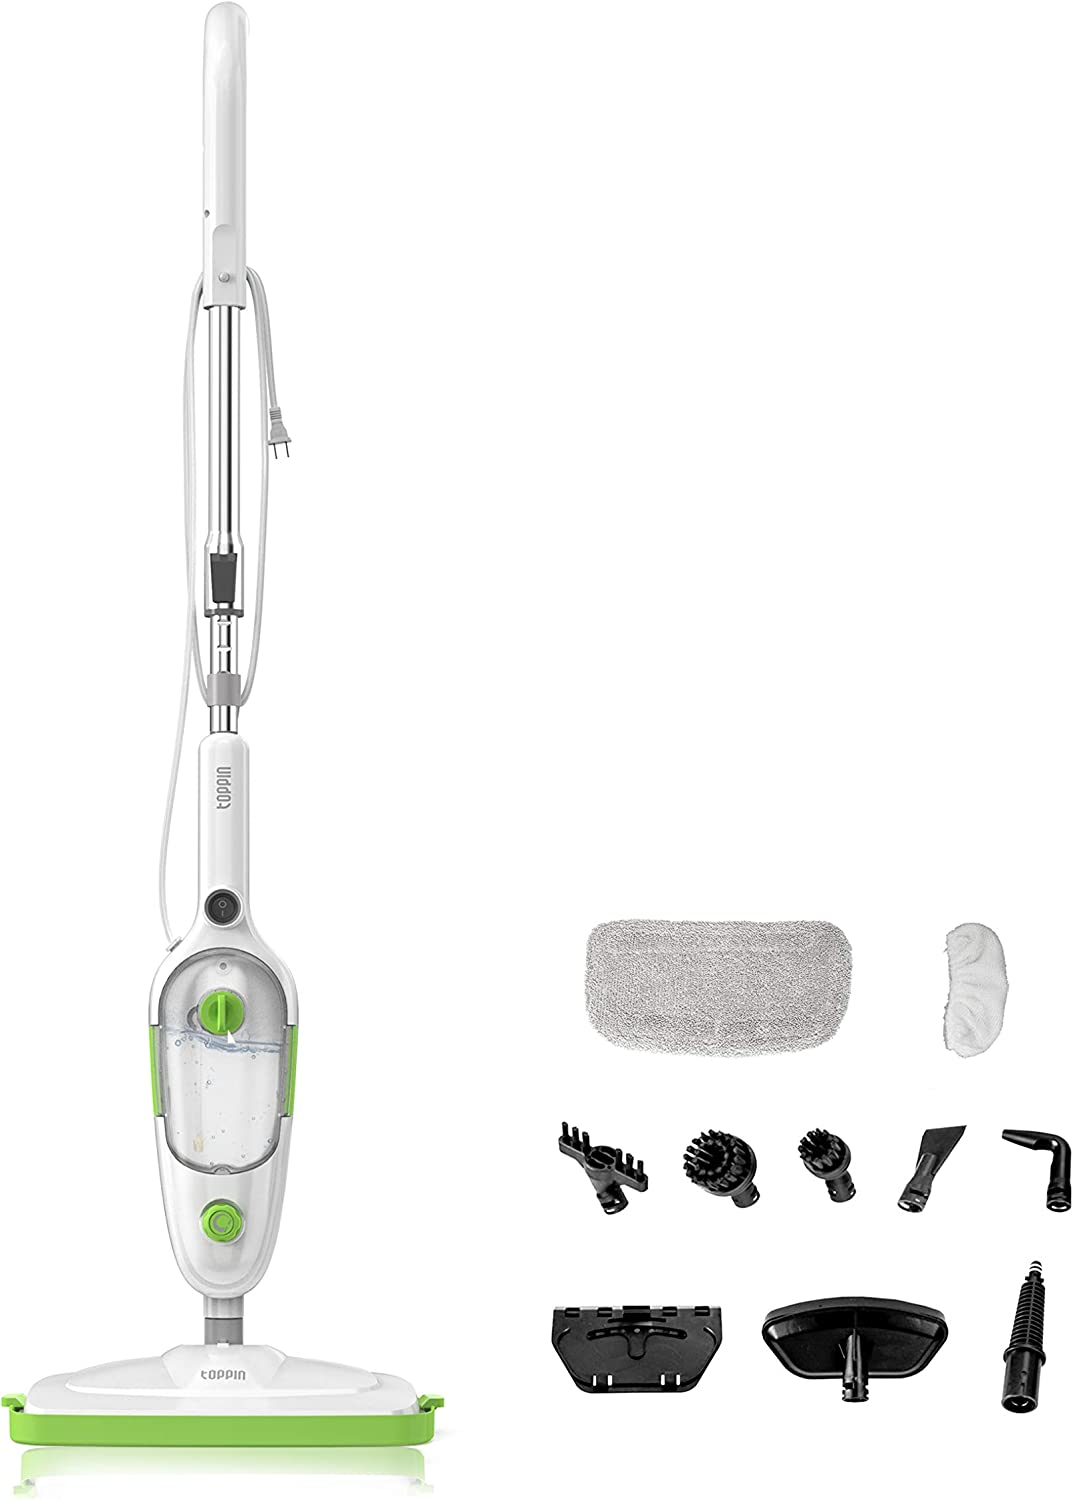 Amazon.com - TOPPIN Steam Mop - 10 in 1 Detachable Handheld Steam Cleaner with 2 Pads, Adjustable Steam Level, 23ft Power Cord, and 450ml Water Tank $42.99